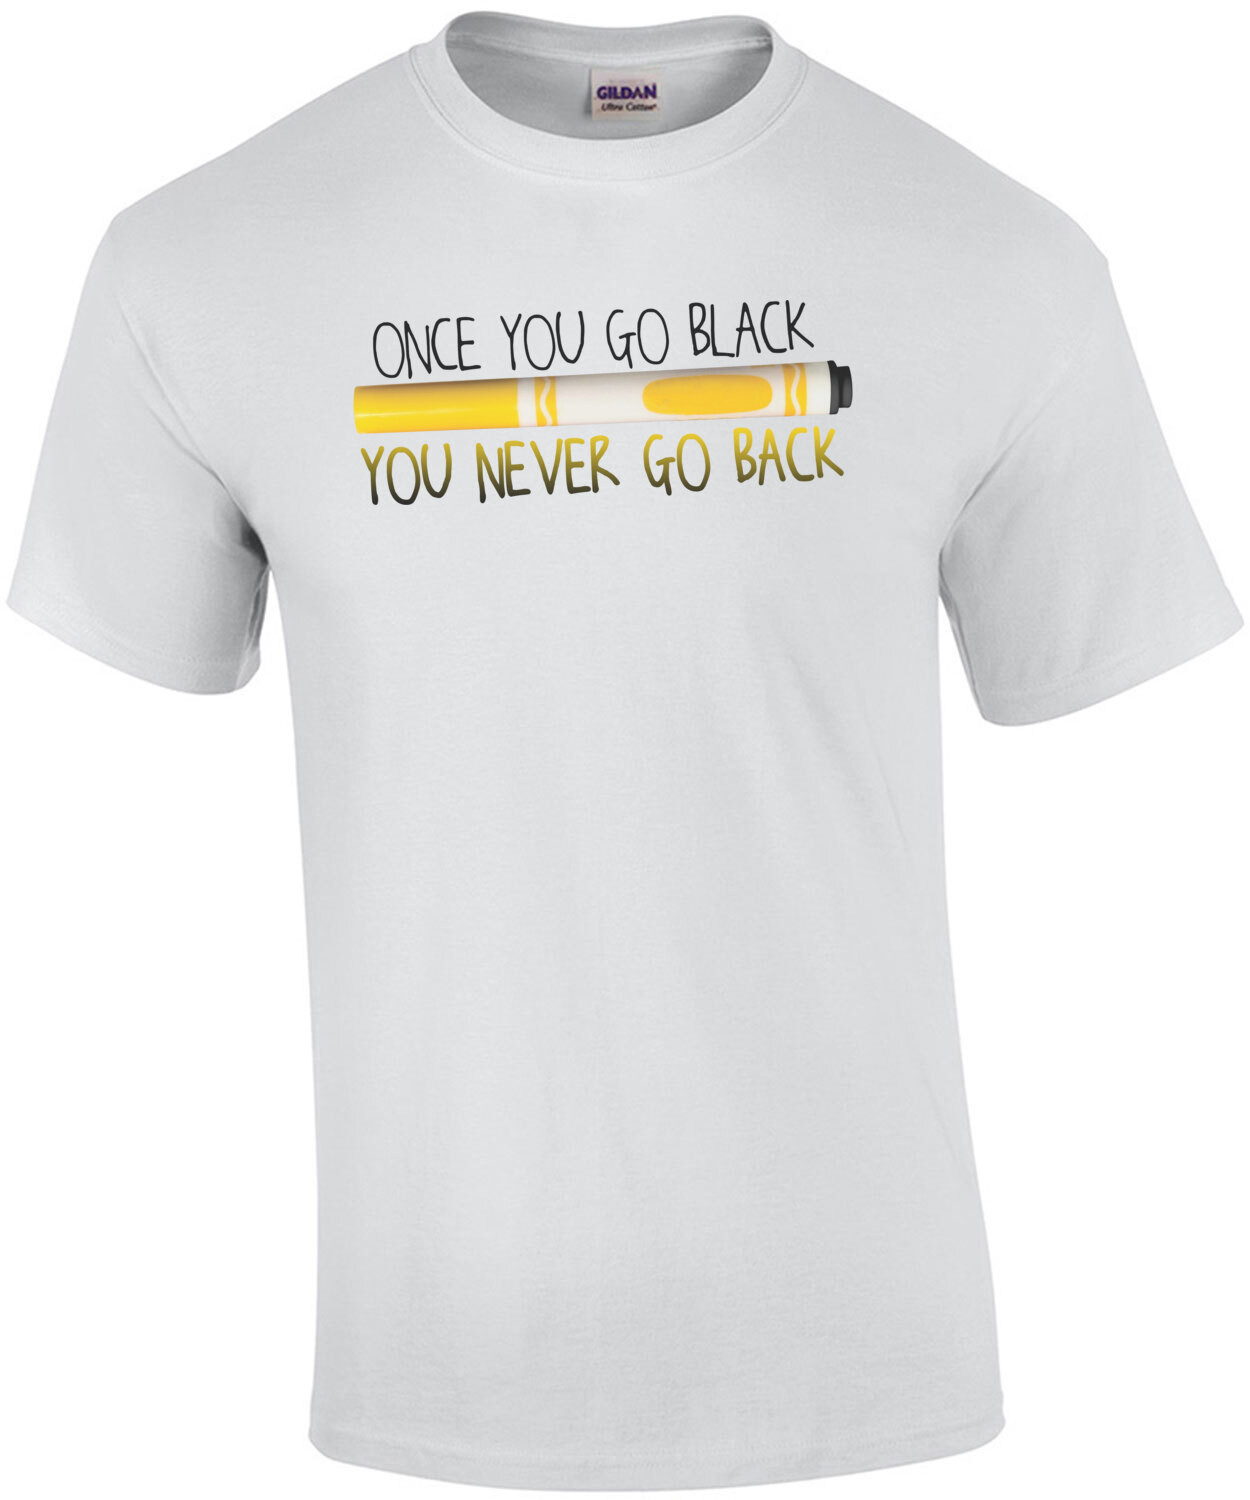 Once You Go Black, You Never Go Back Funny Tee